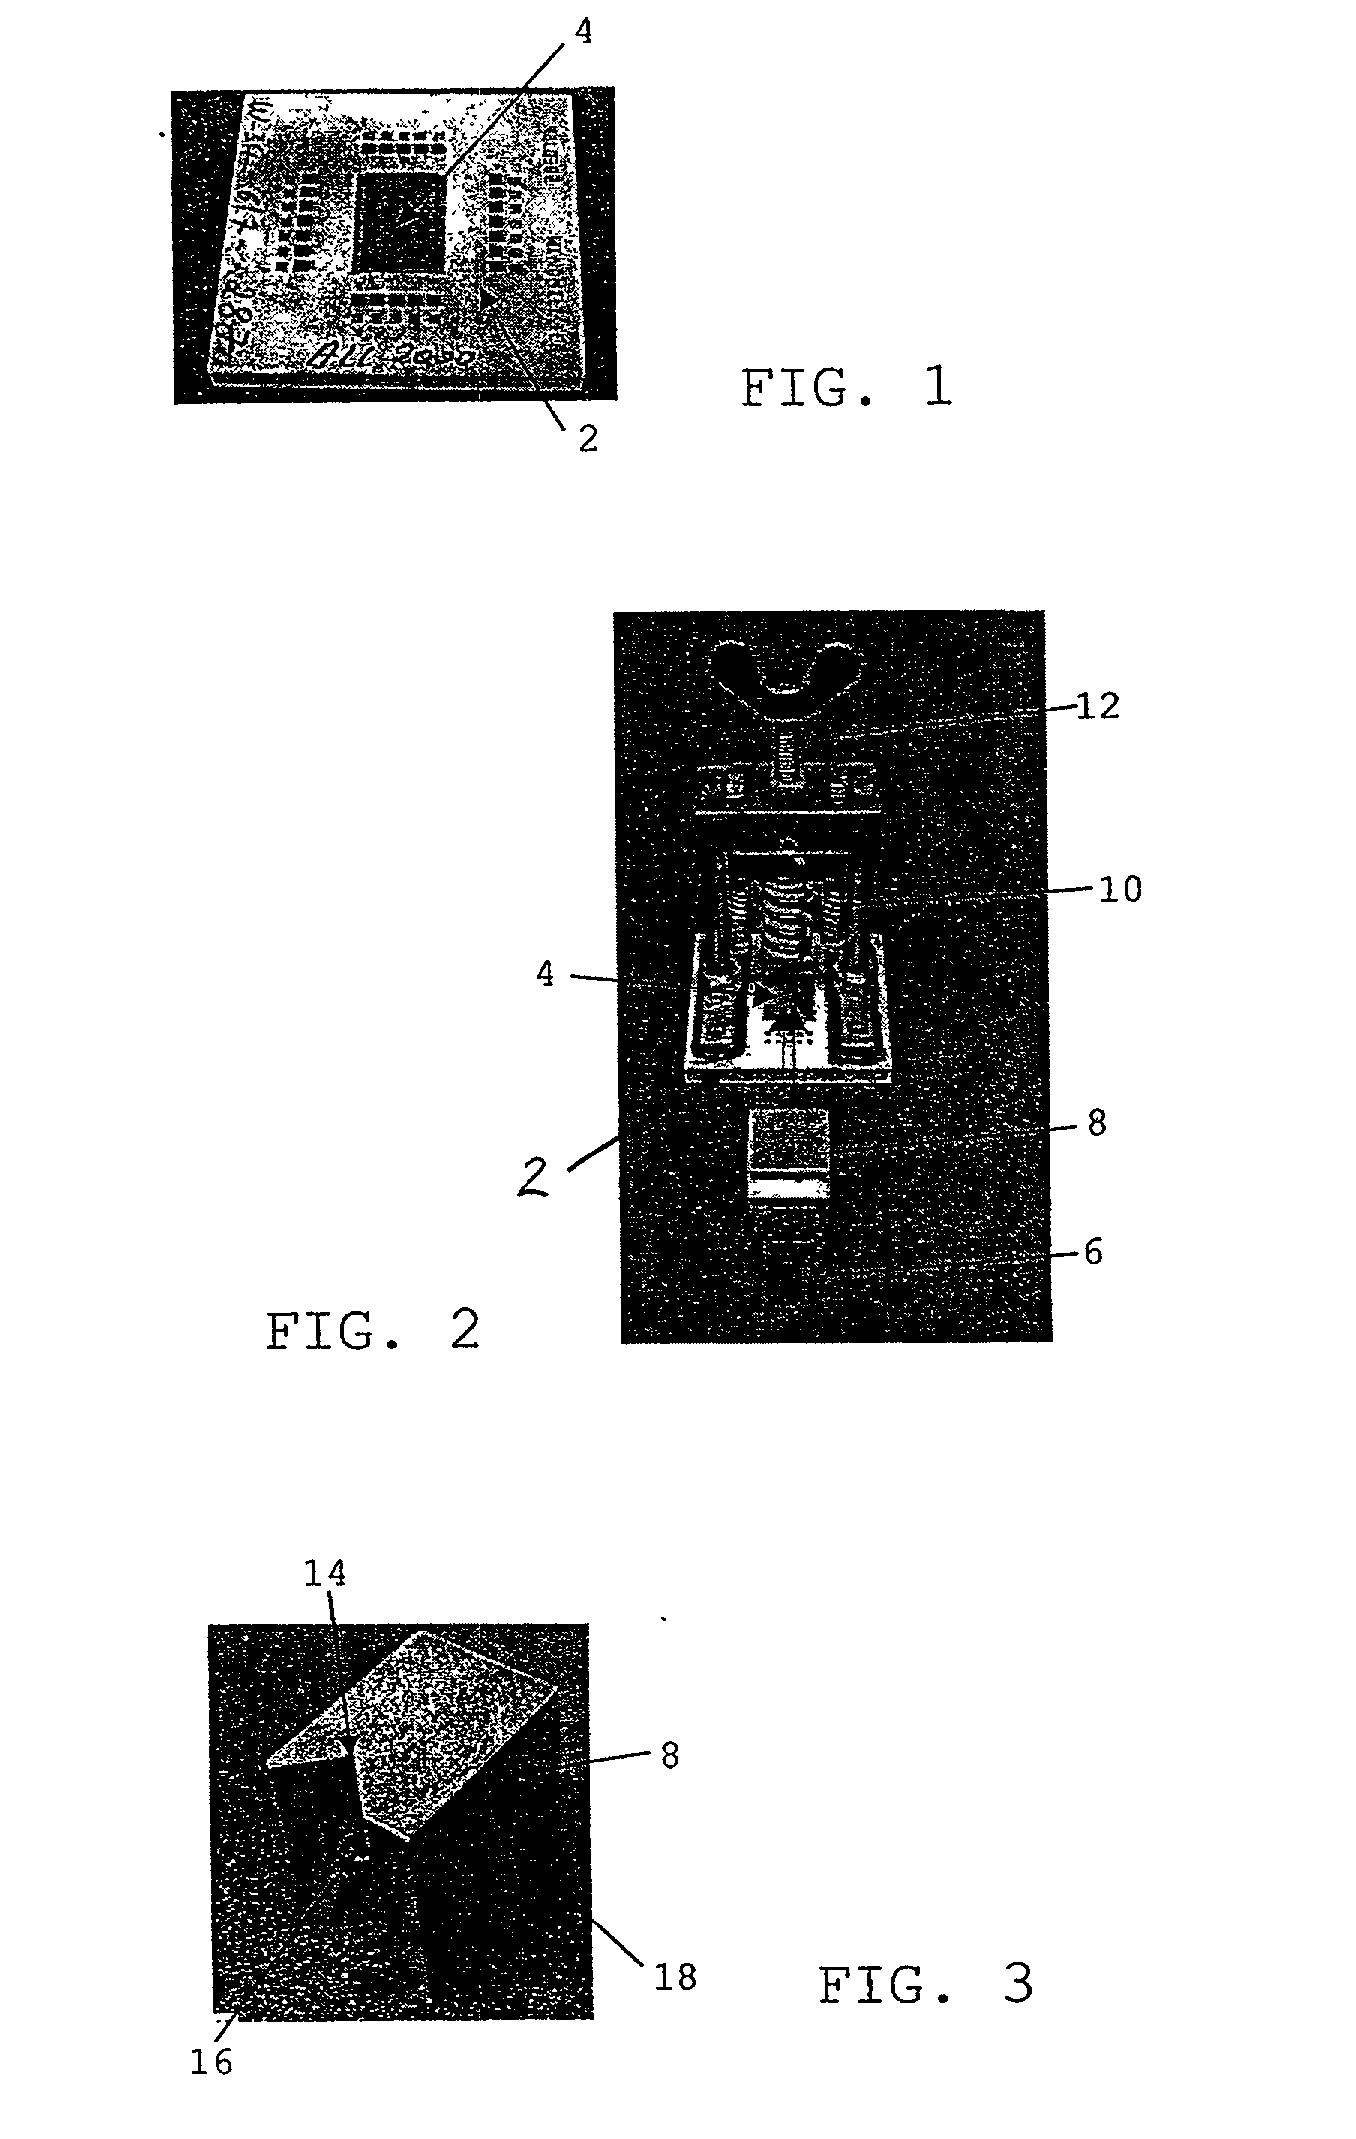 Support carrier for temporarily attaching integrated circuit chips to a chip carrier and method